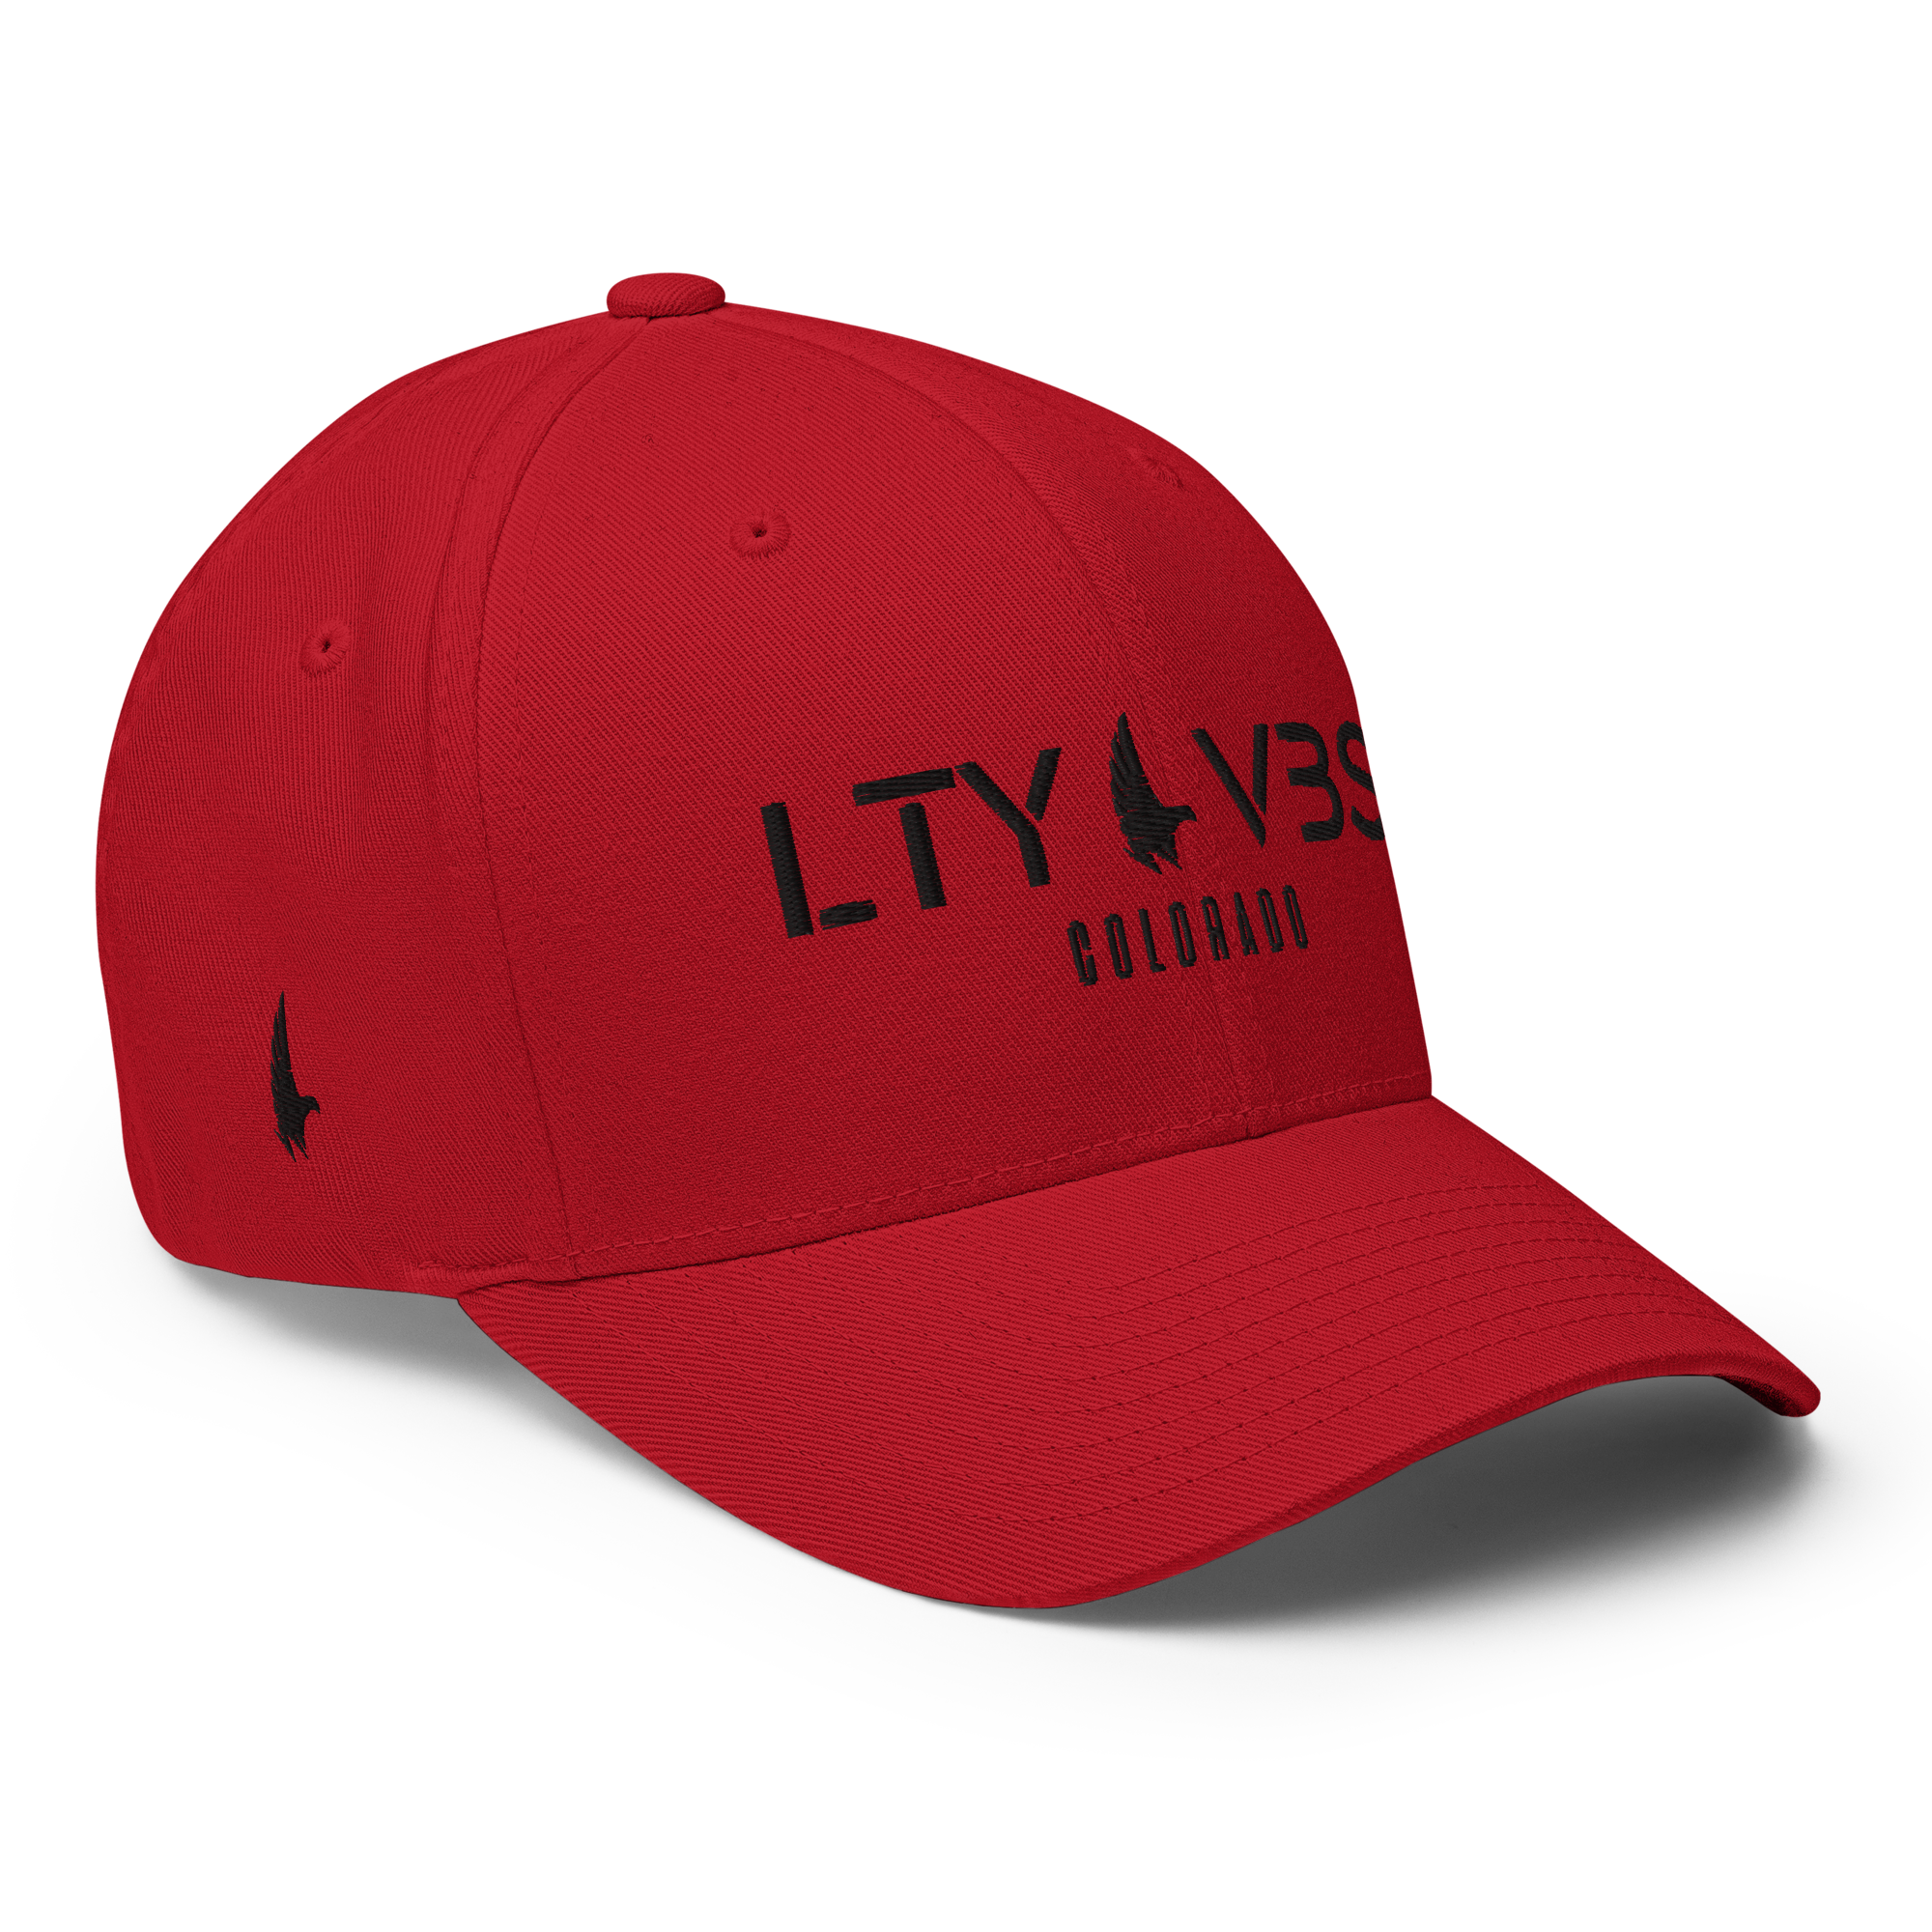 Loyalty Era Colorado Fitted Hat - Red / Black Fitted - Loyalty Vibes